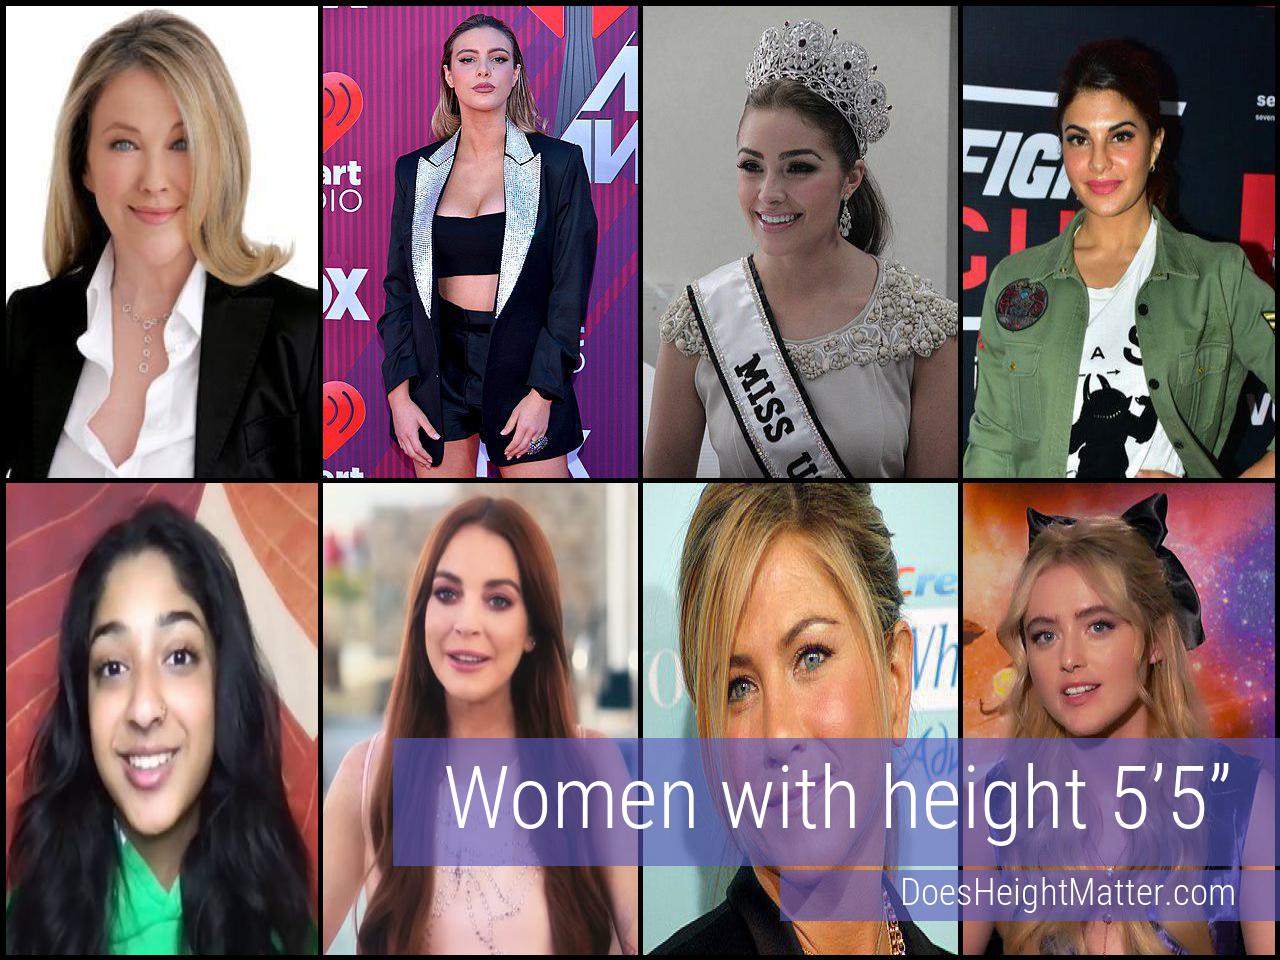 Female celebrities who are 5'5